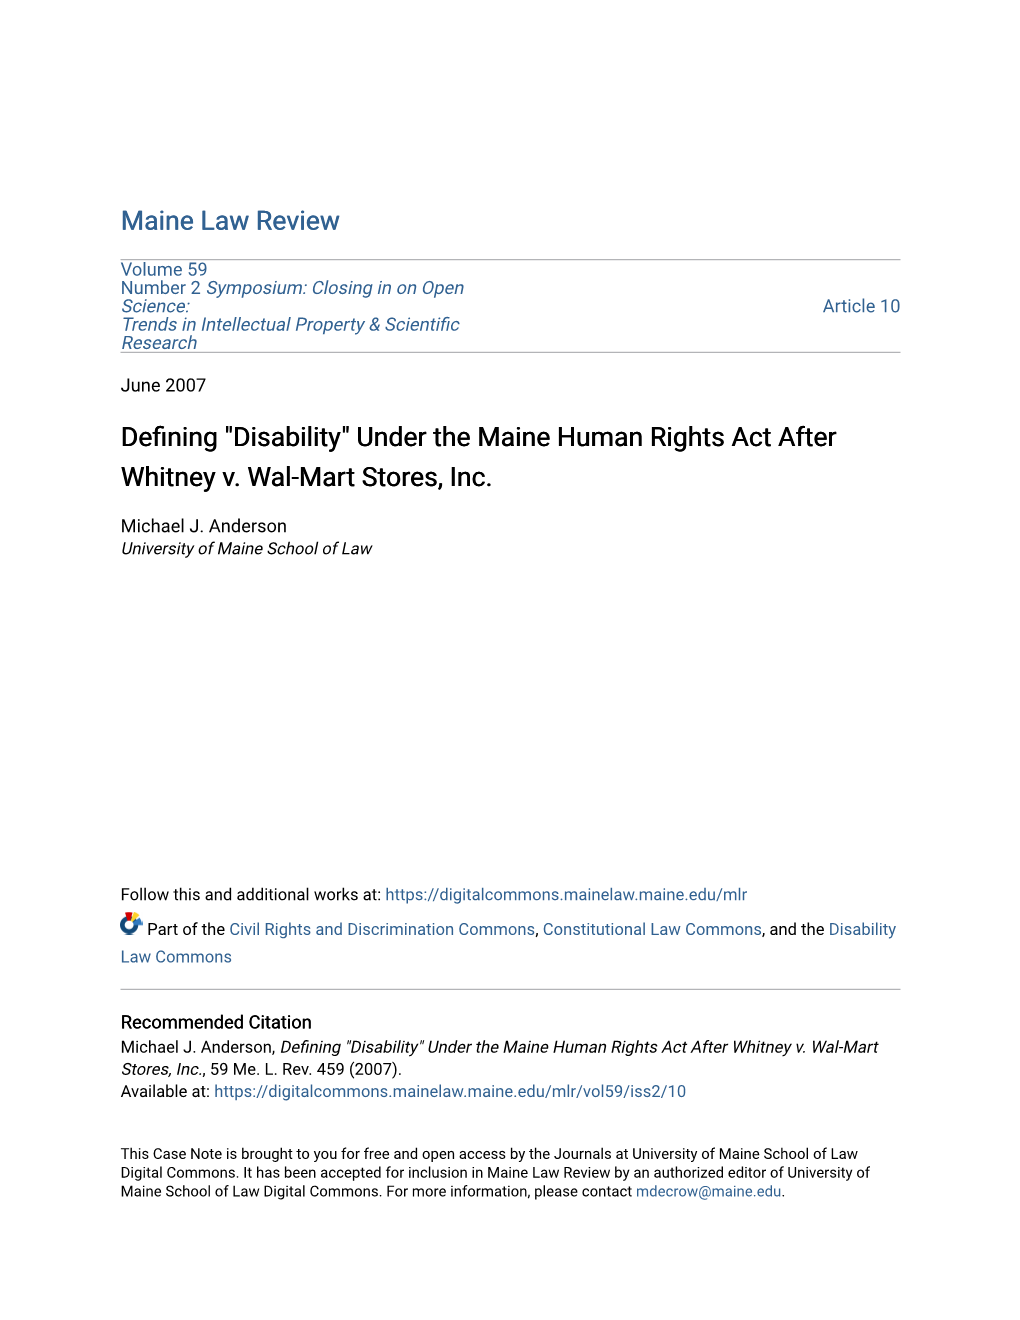 Under the Maine Human Rights Act After Whitney V. Wal-Mart Stores, Inc